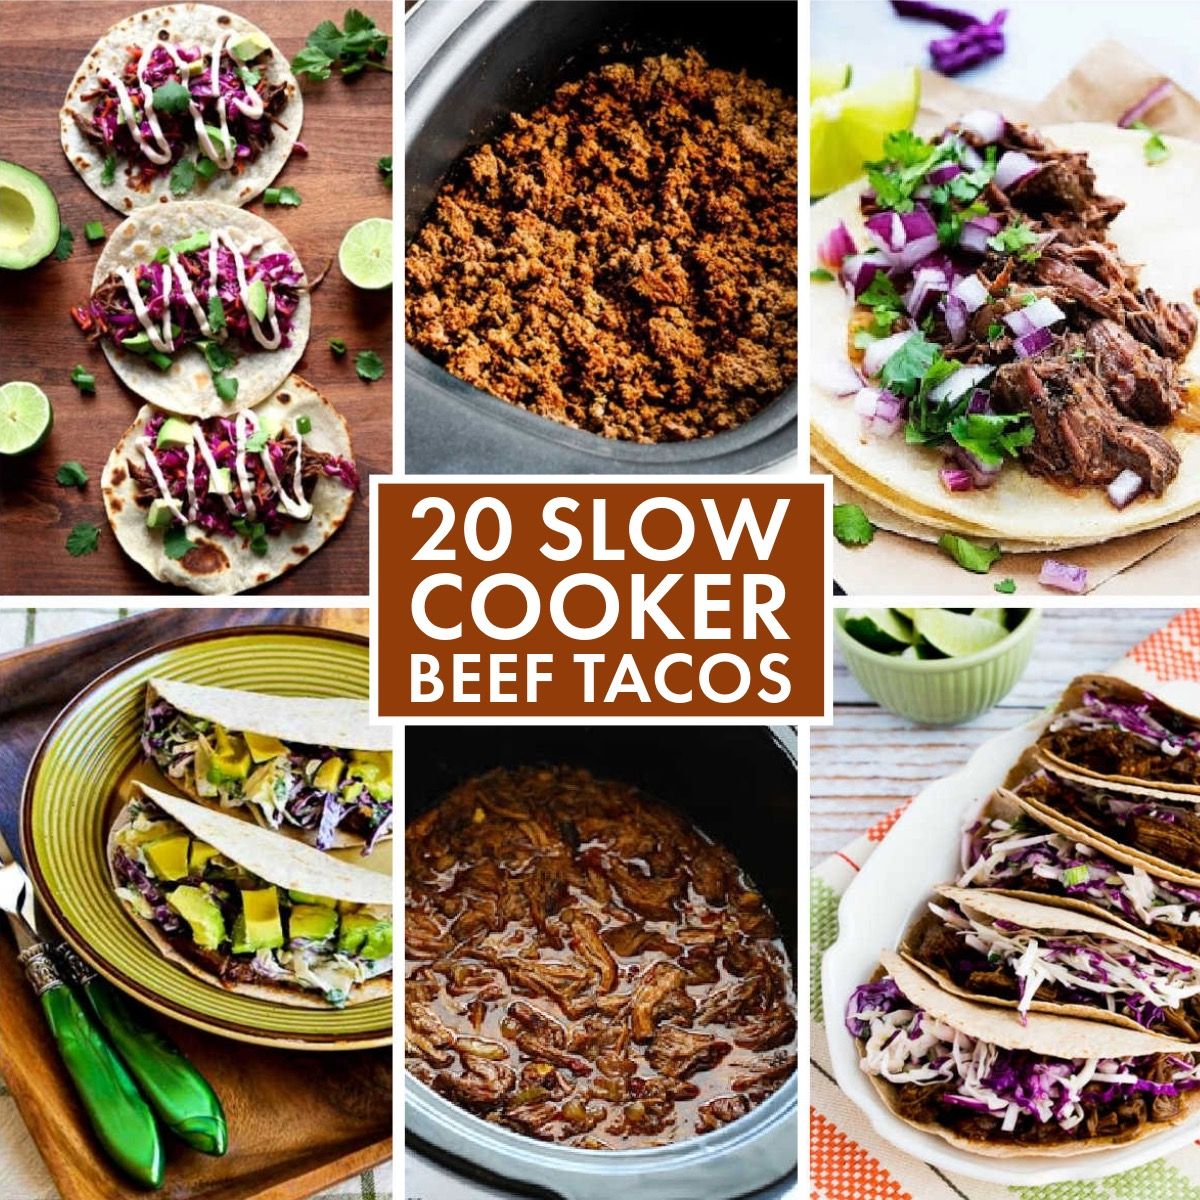 Collage image for 20 Slow Cooker Beef Tacos showing featured recipes.